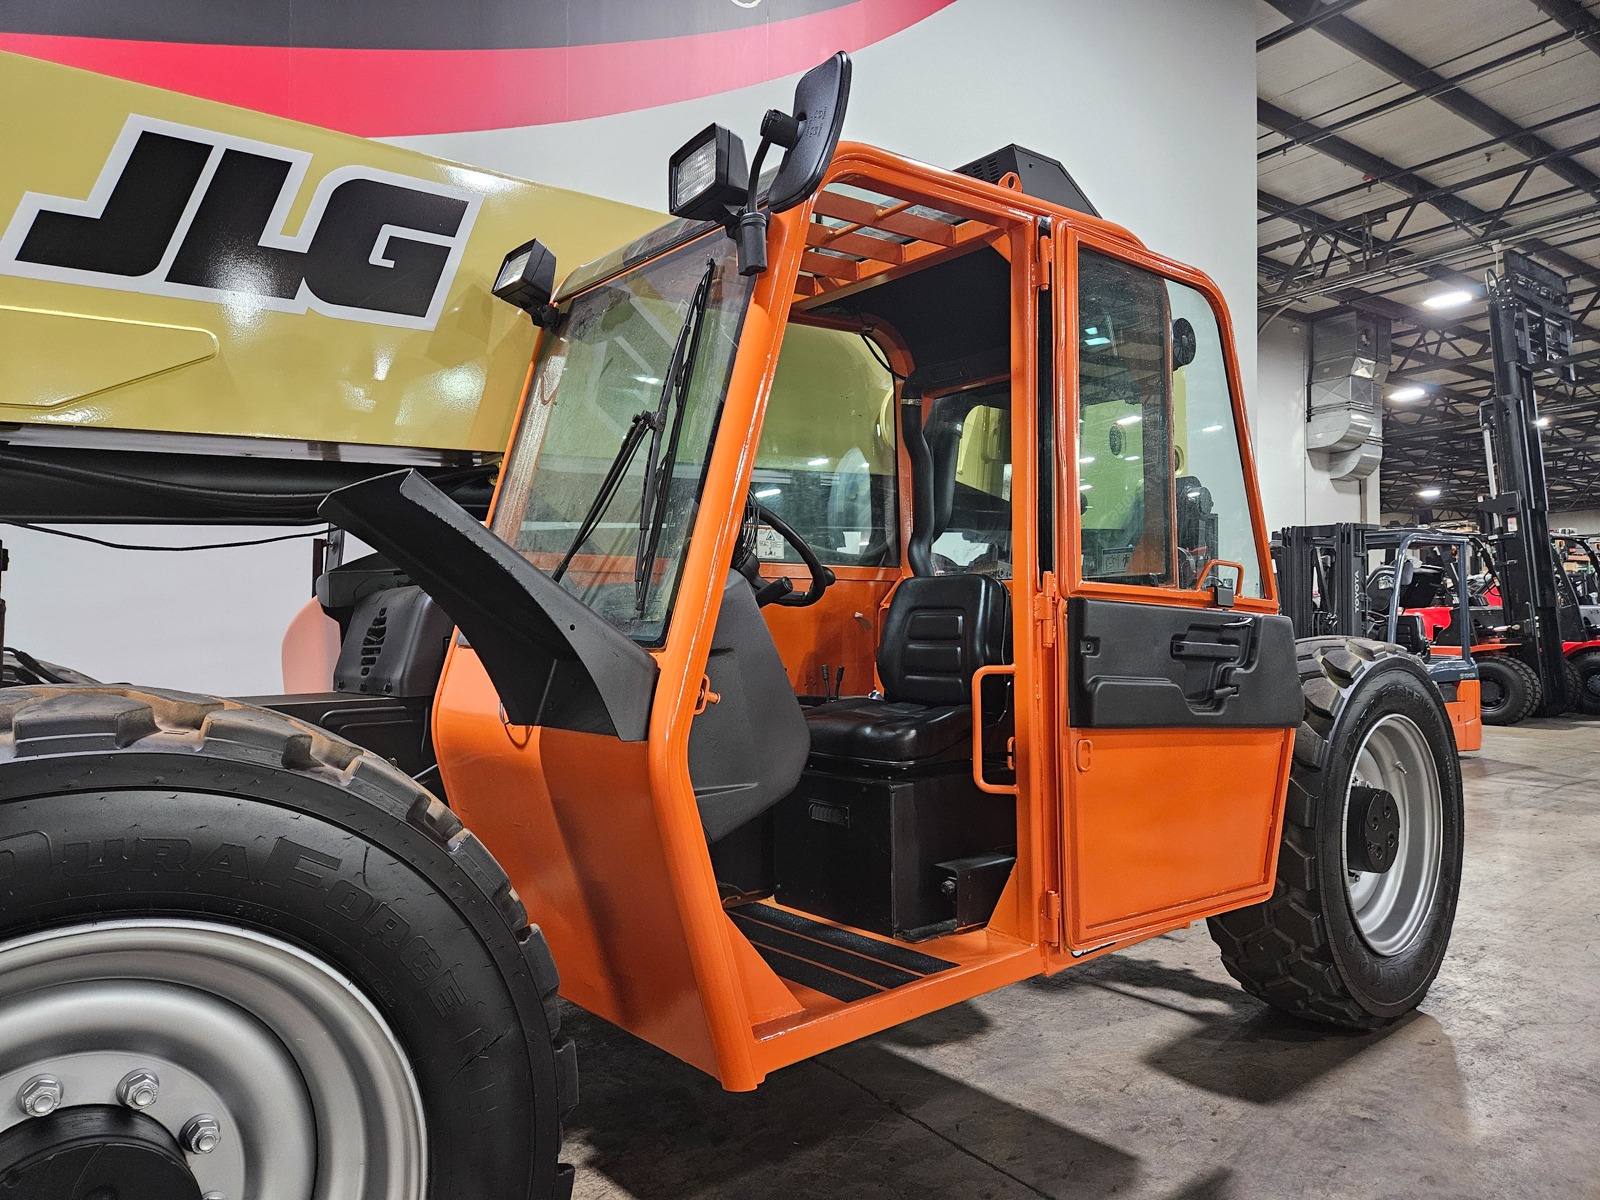 Used 2014 JLG G12-55A  | Cary, IL